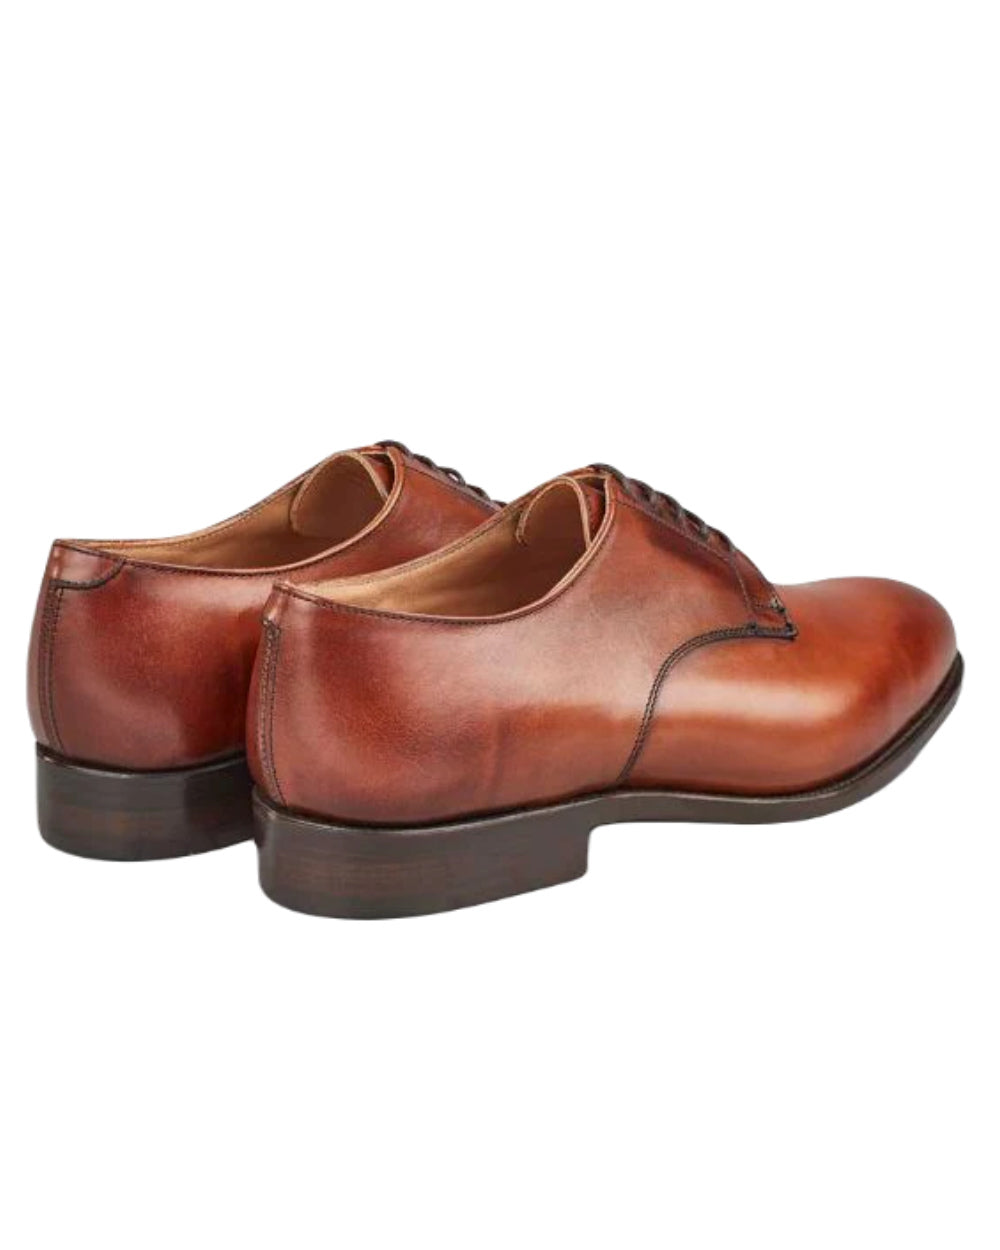 Chestnut Coloured Trickers Wiltshire Plain Derby City Shoe On A White Background 